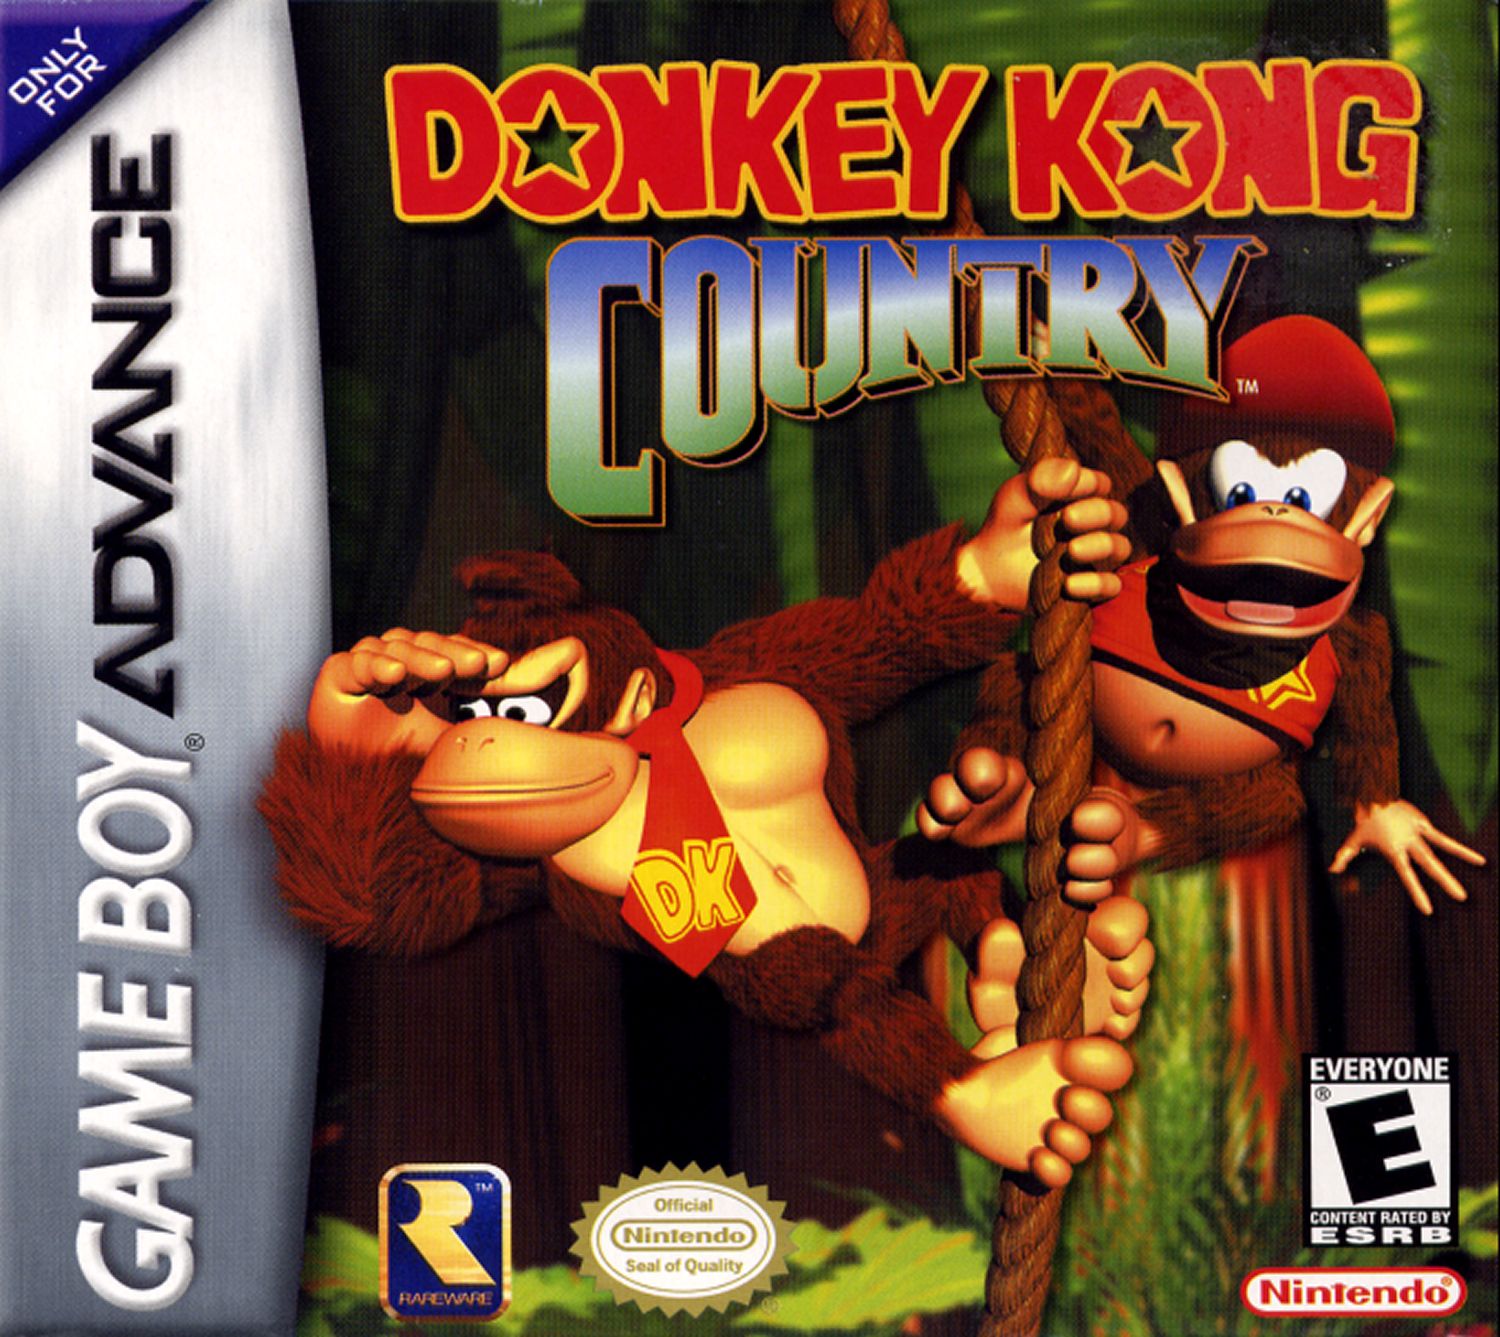 Donkey Kong Country 3 Cheats For Gameboy Advance